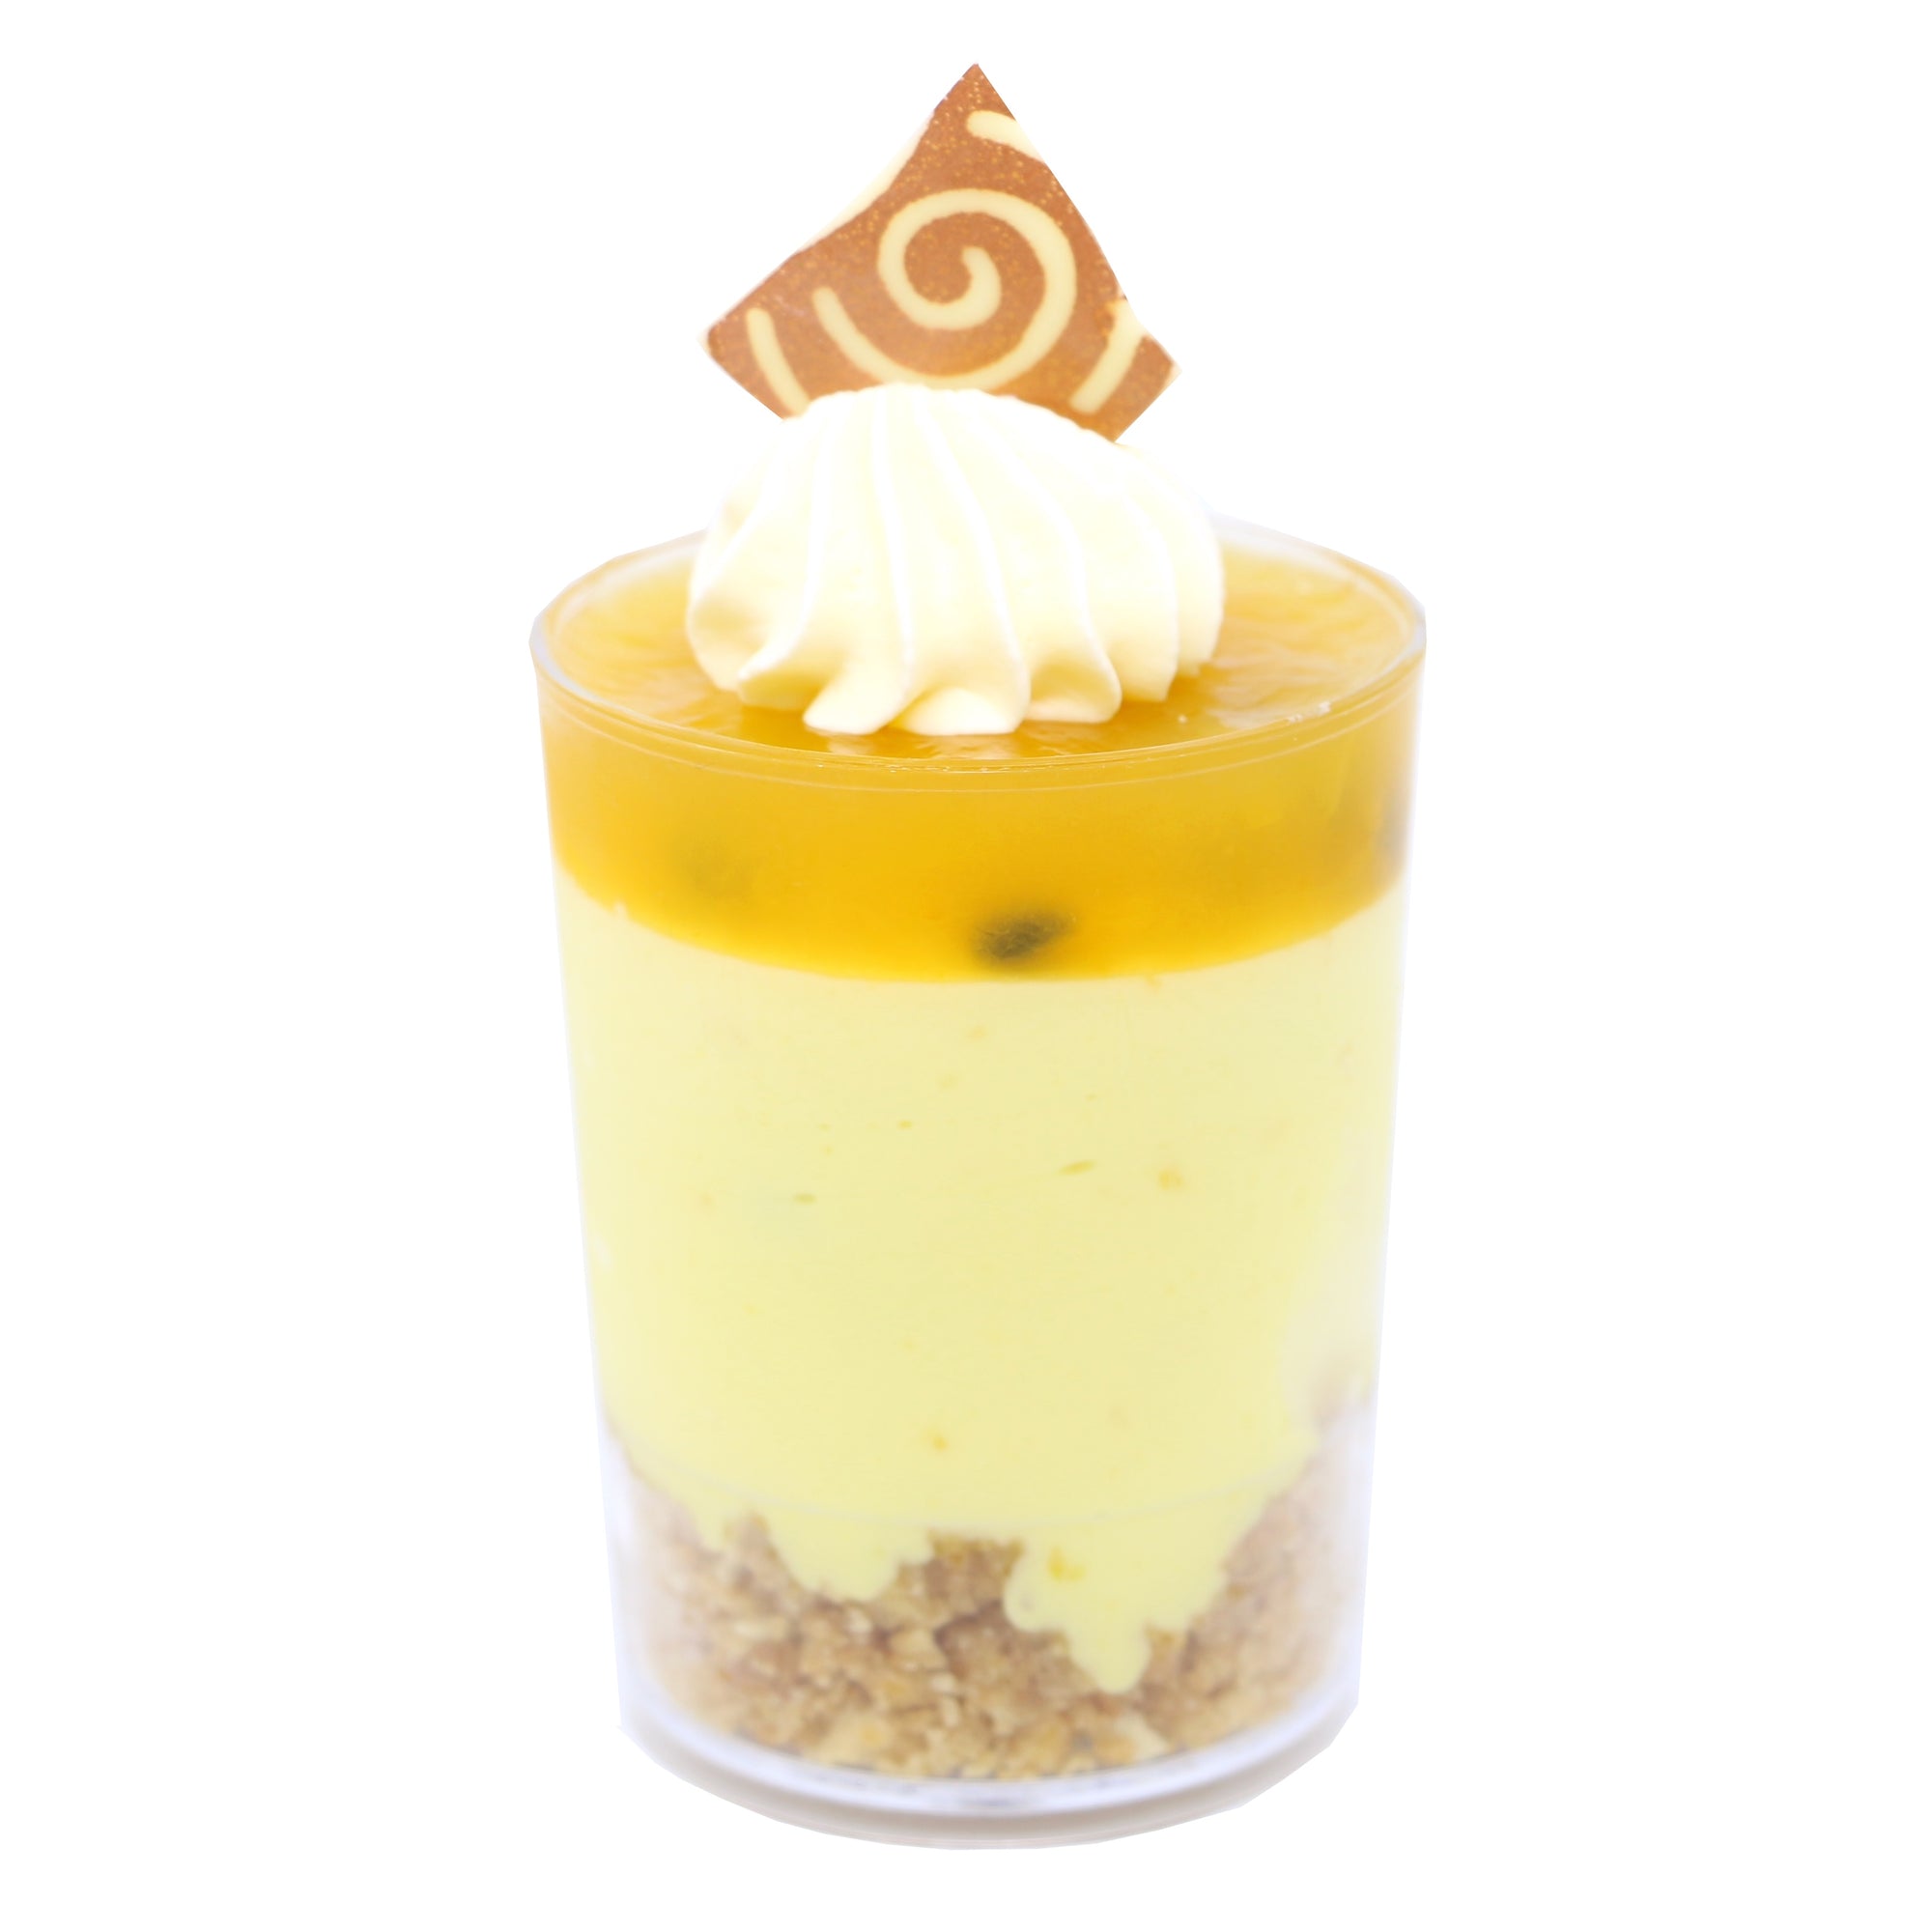 Dessert Cup - Passionfruit Cheesecake - Treats2eat - Wedding & Birthday Party Dessert Catering Near Me